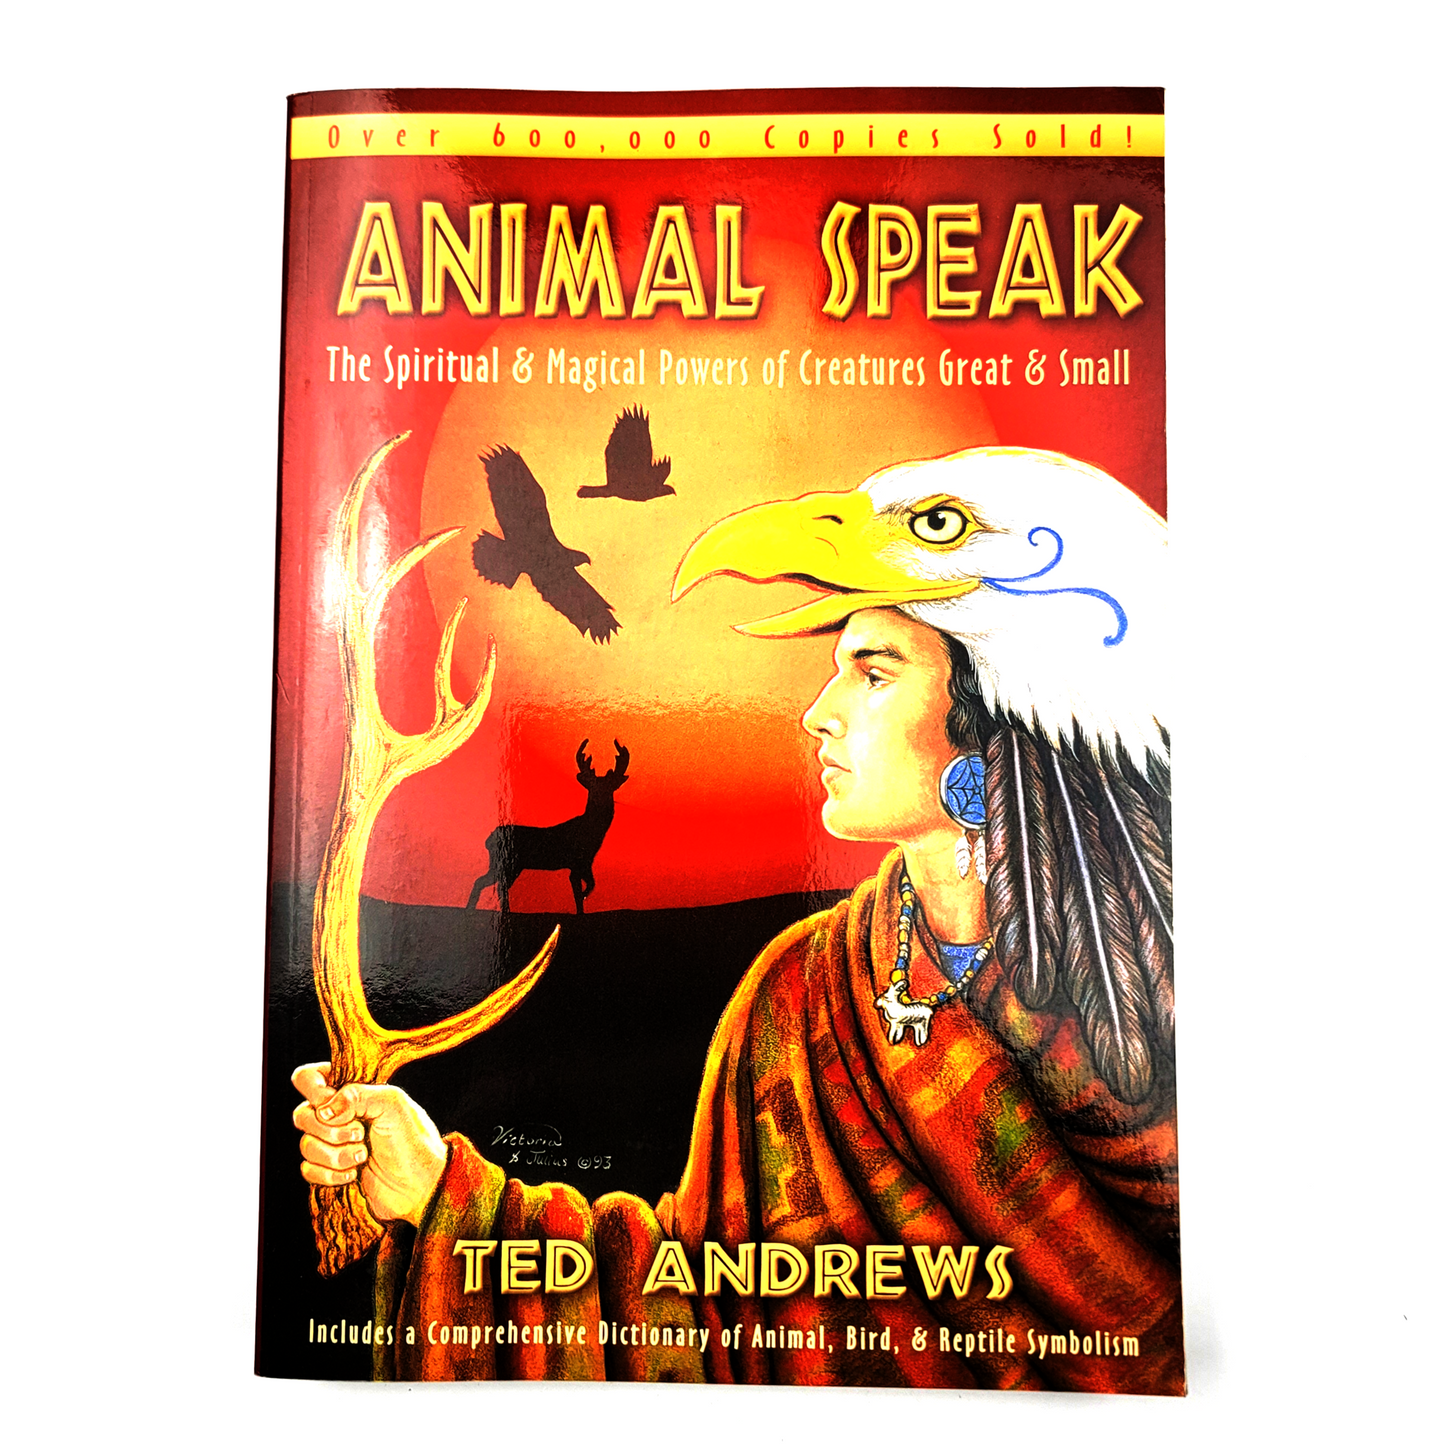 Animal-Speak: The Spiritual & Magical Powers of Creatures Great & Small by Ted Andrews